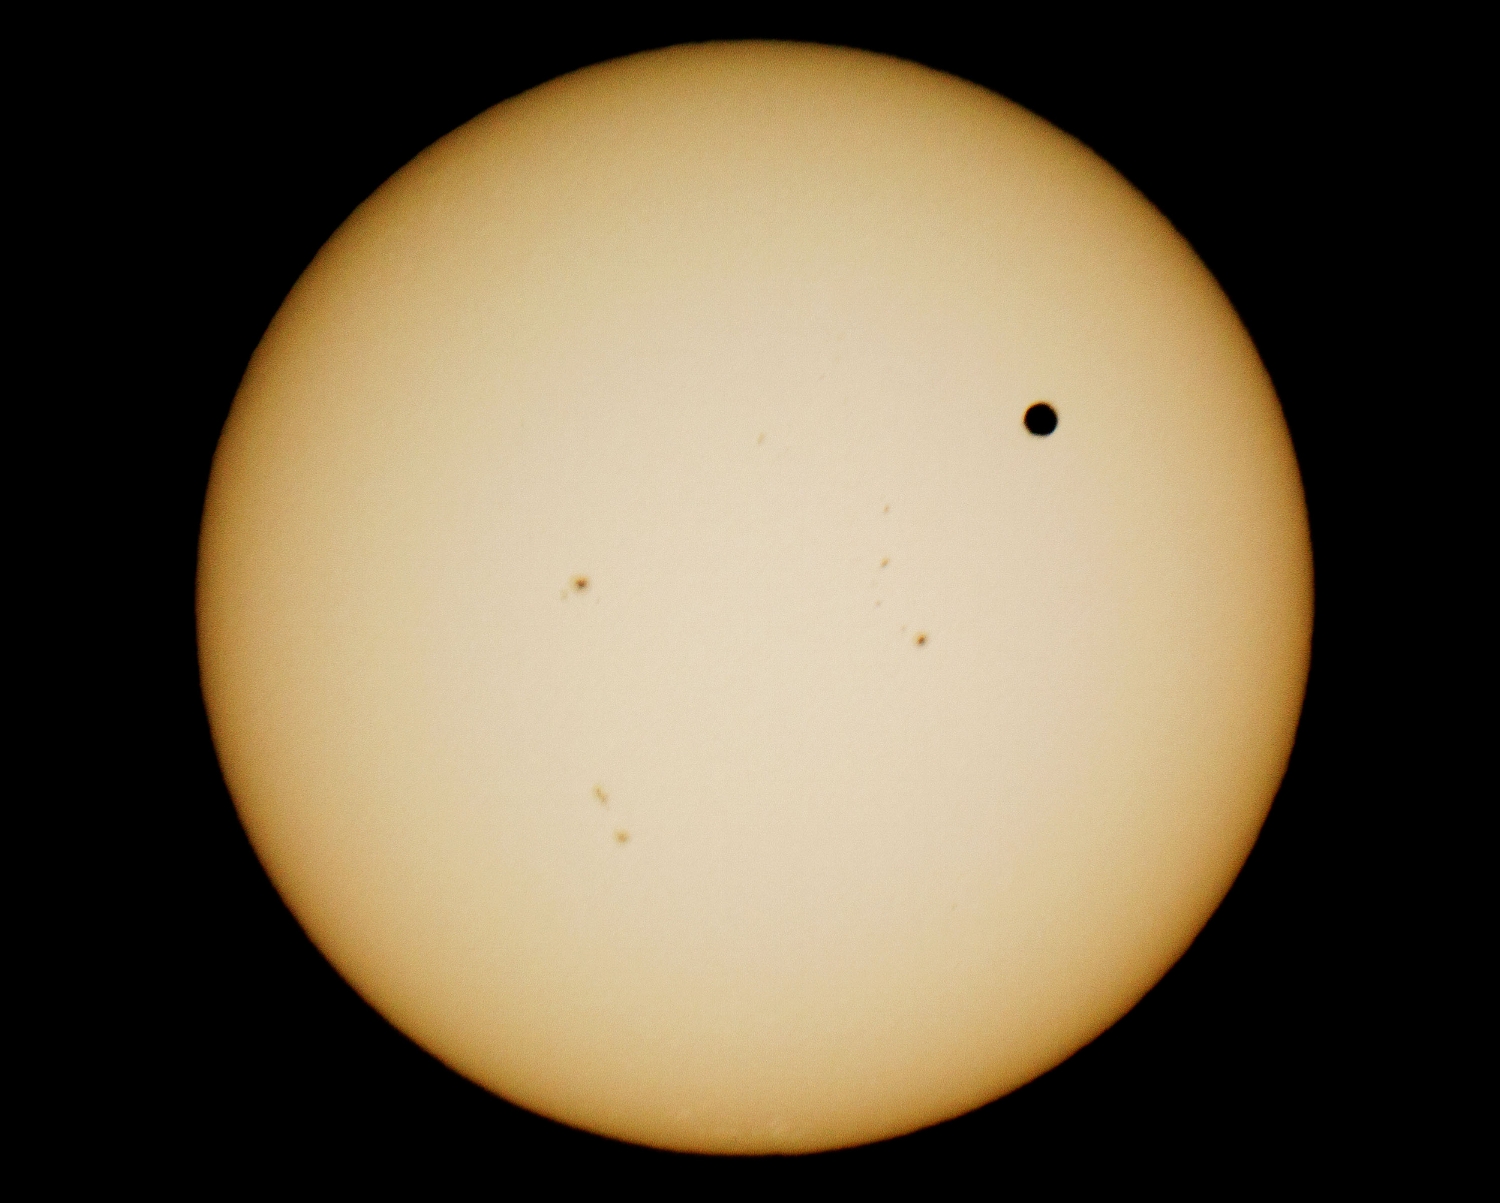  A silhouette of the planet Venus against the sun during the Transit of Venus viewing event at the El Dorado Observatory in Placerville, CA on Tuesday, June 5, 2012. 